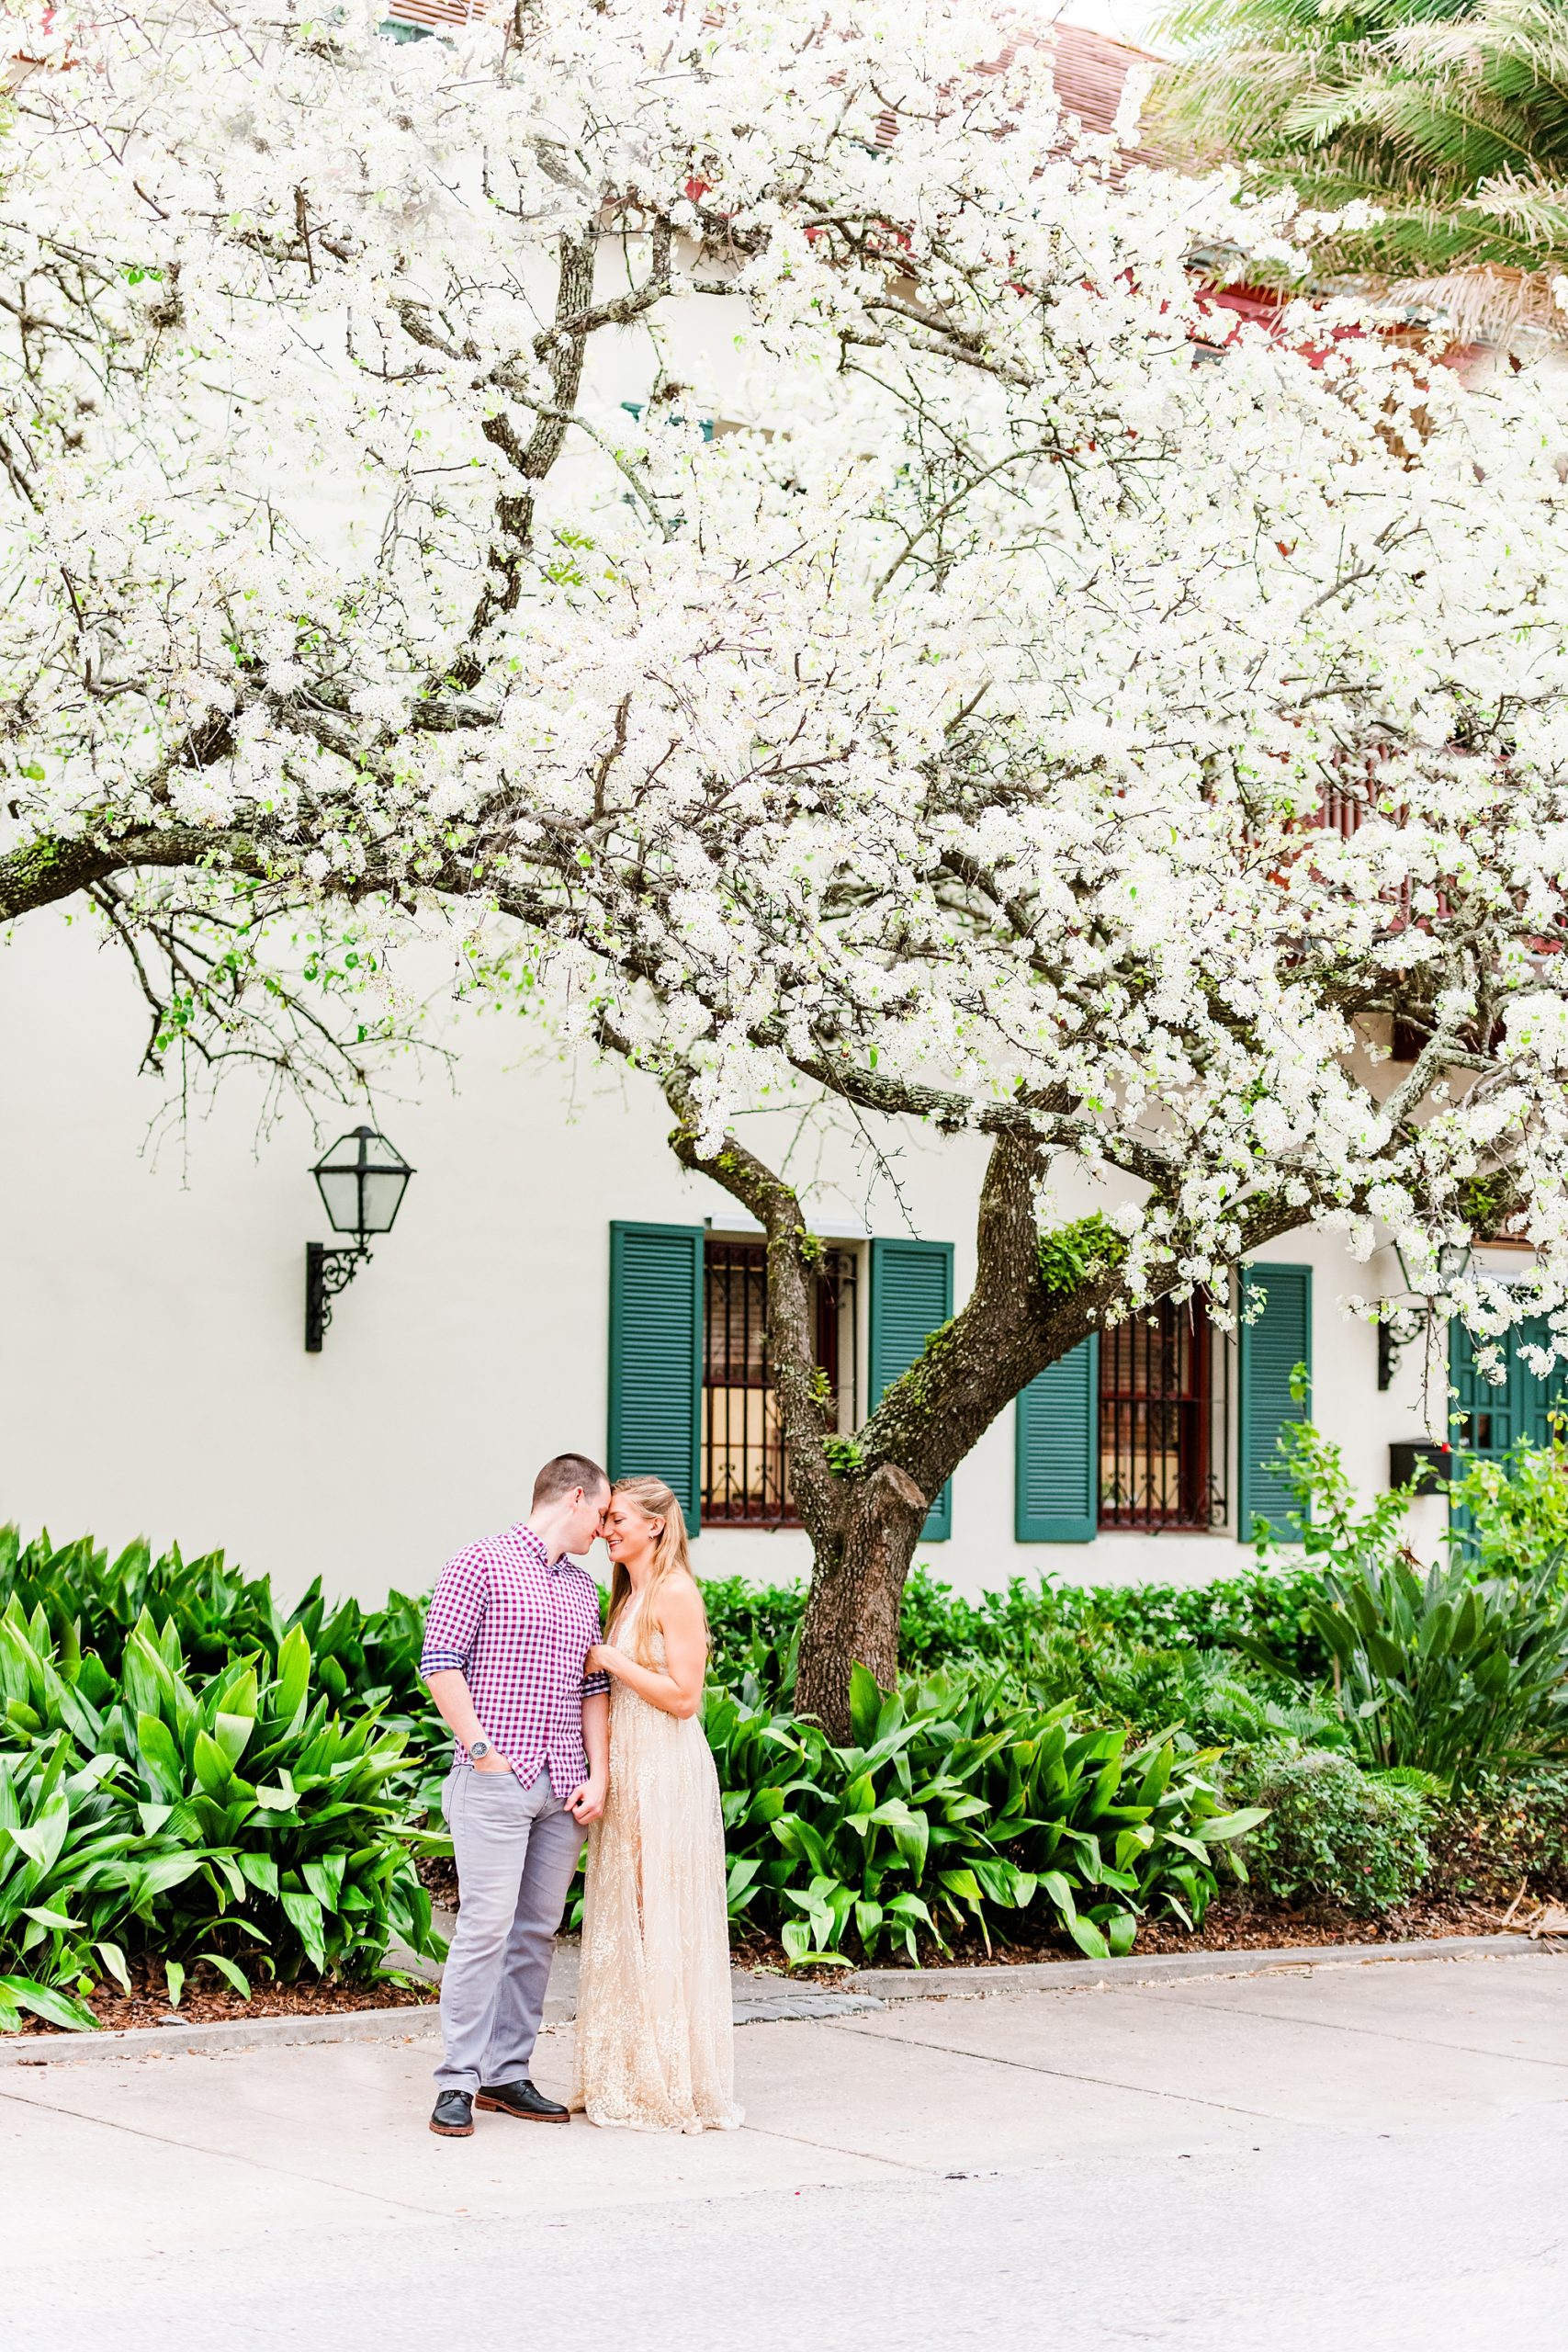 Orlando Photographer | St. Augustine Engagement | Chynna Pacheco Photography-48